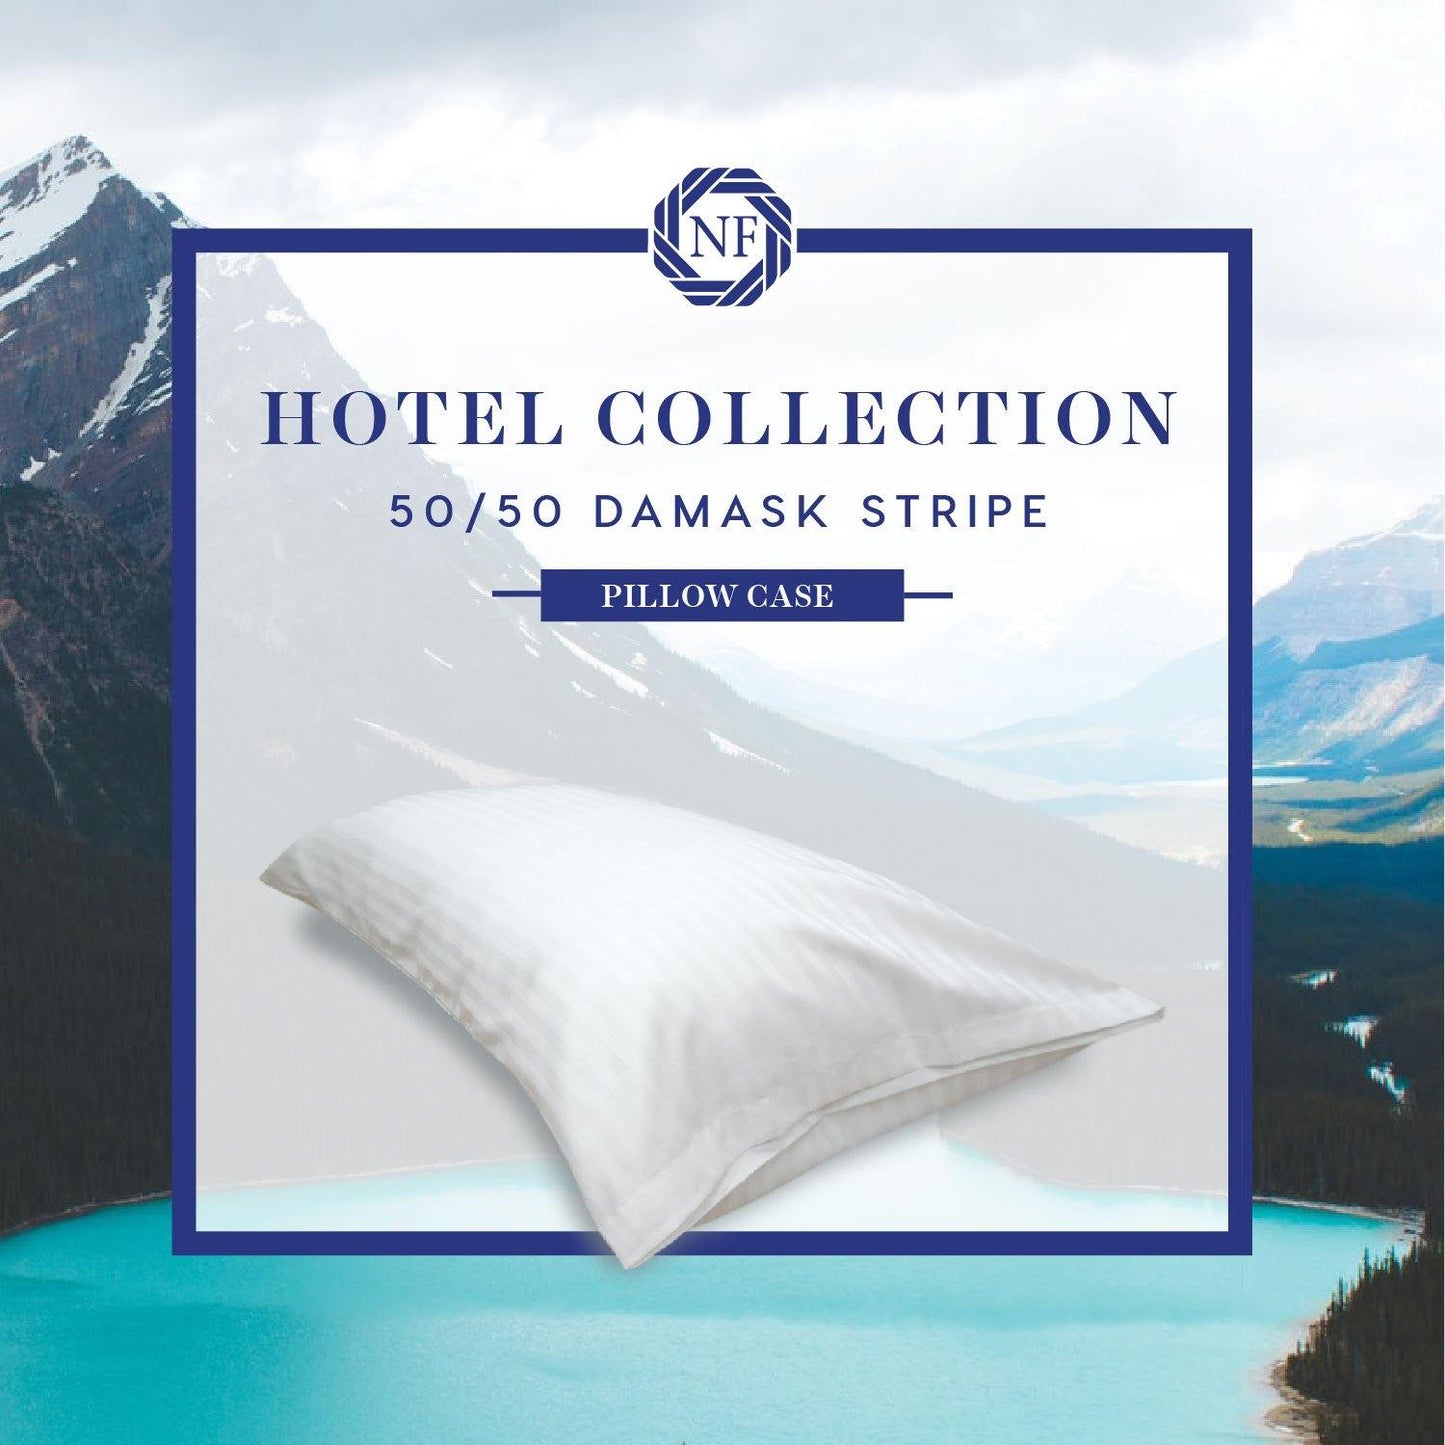 Hotel Collection 50/50 Damask Stripe Bed Sheets - Northern Feather Canada eStore